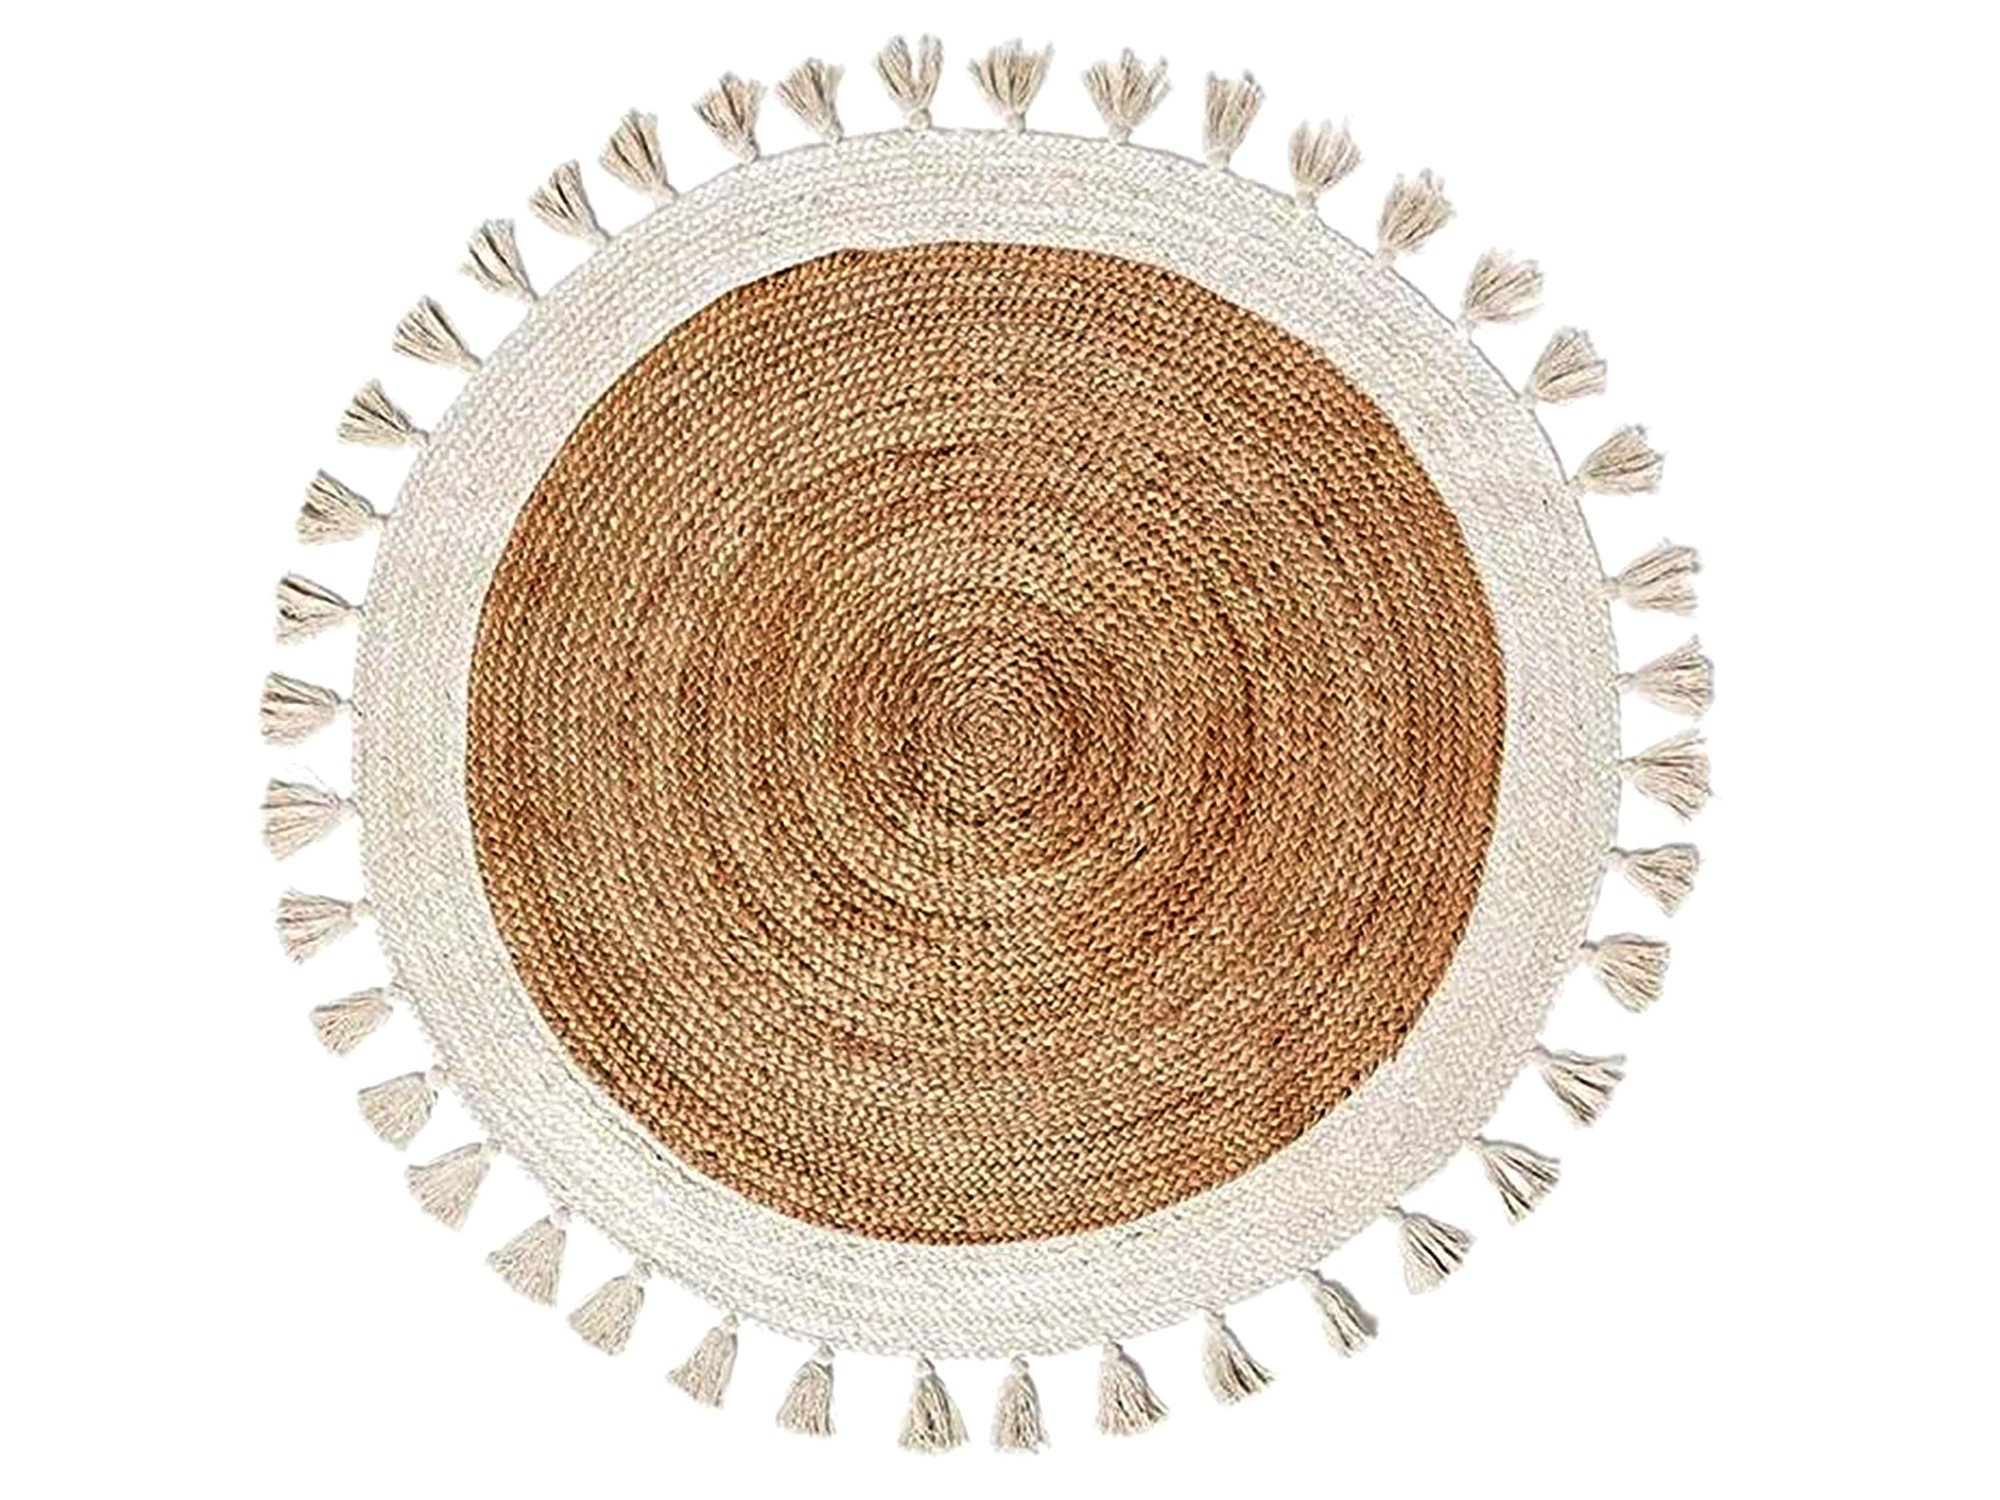 Indian Handmade Natural Jute Oval Rug With White Border Yoga Mat